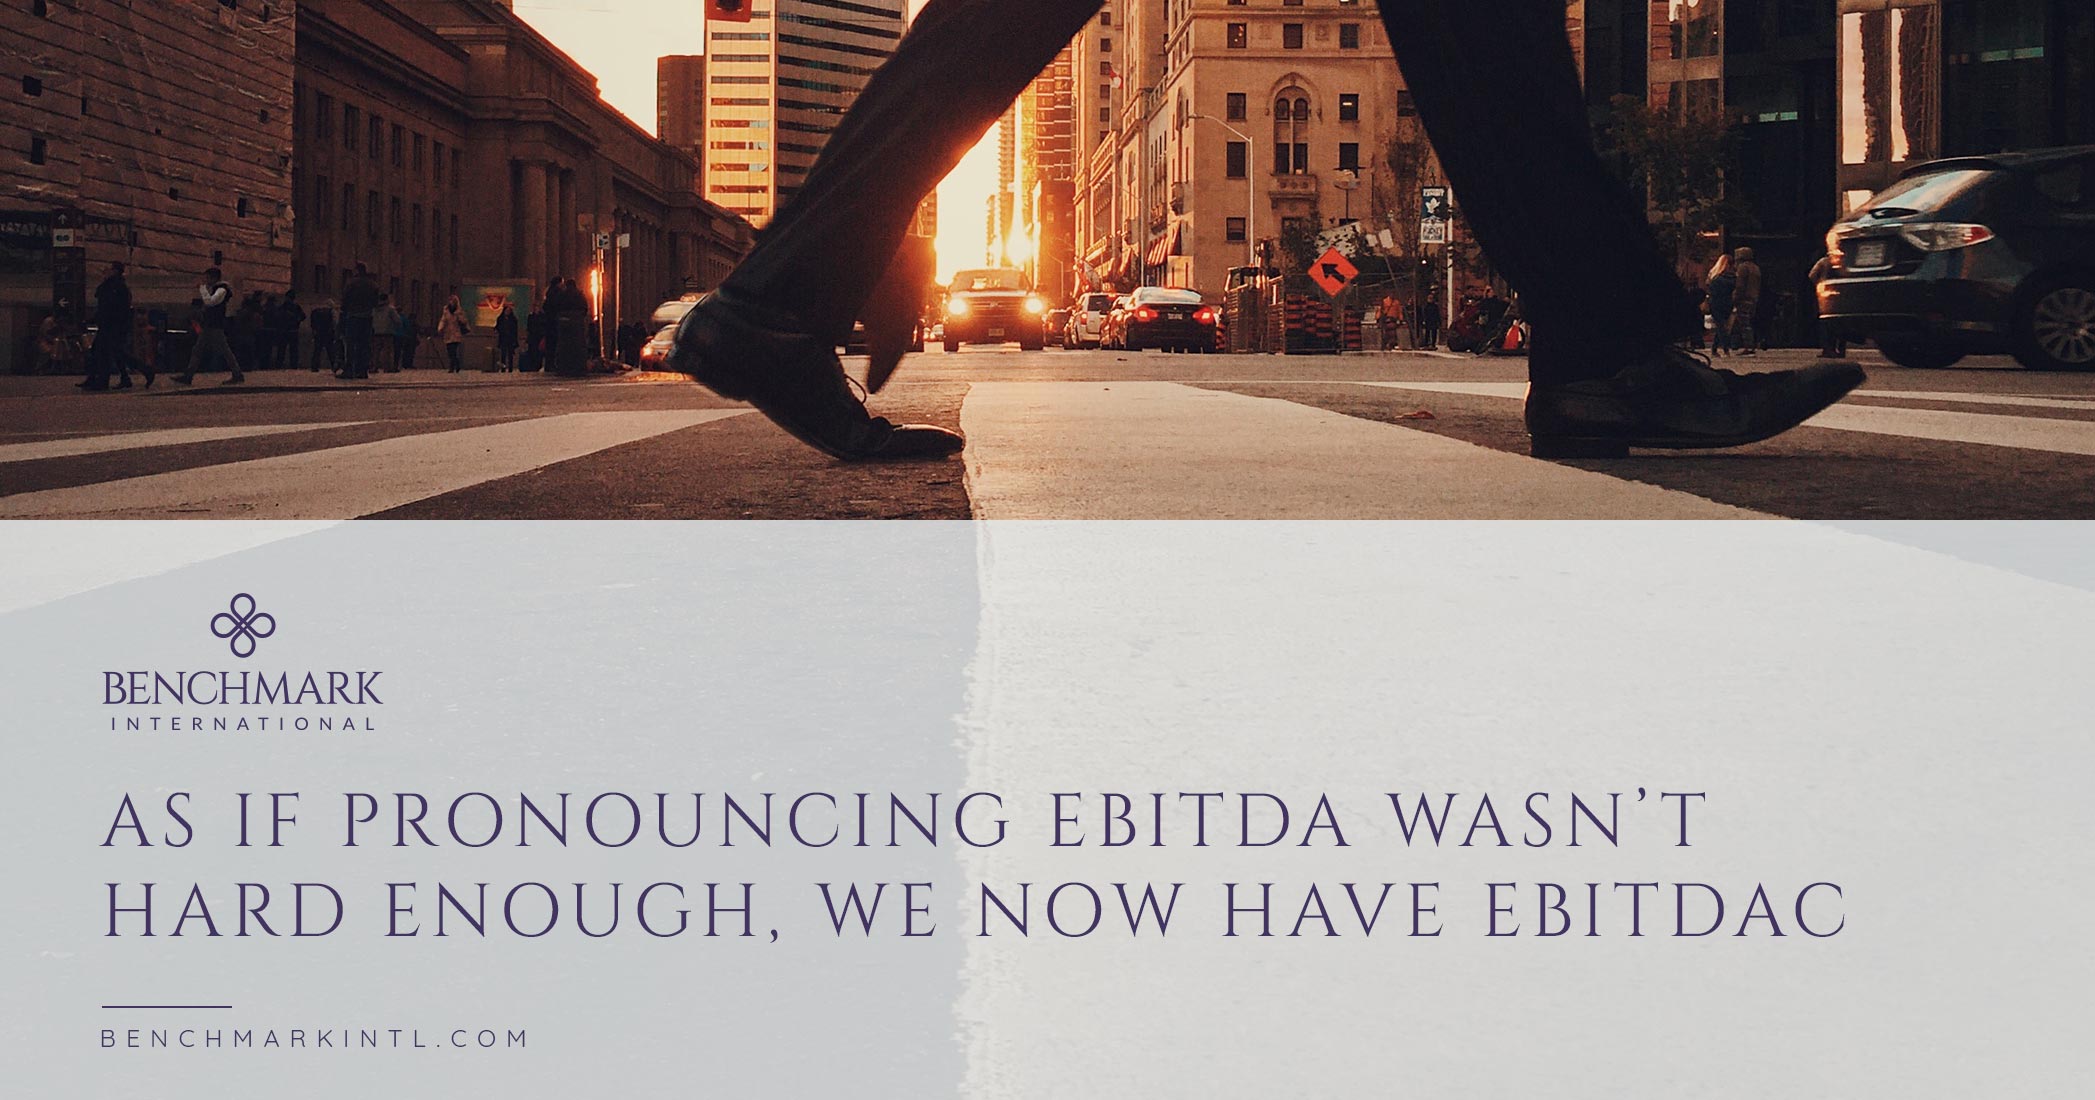 As If Pronouncing EBITDA Wasn't Hard Enough, We Now Have EBITDAC